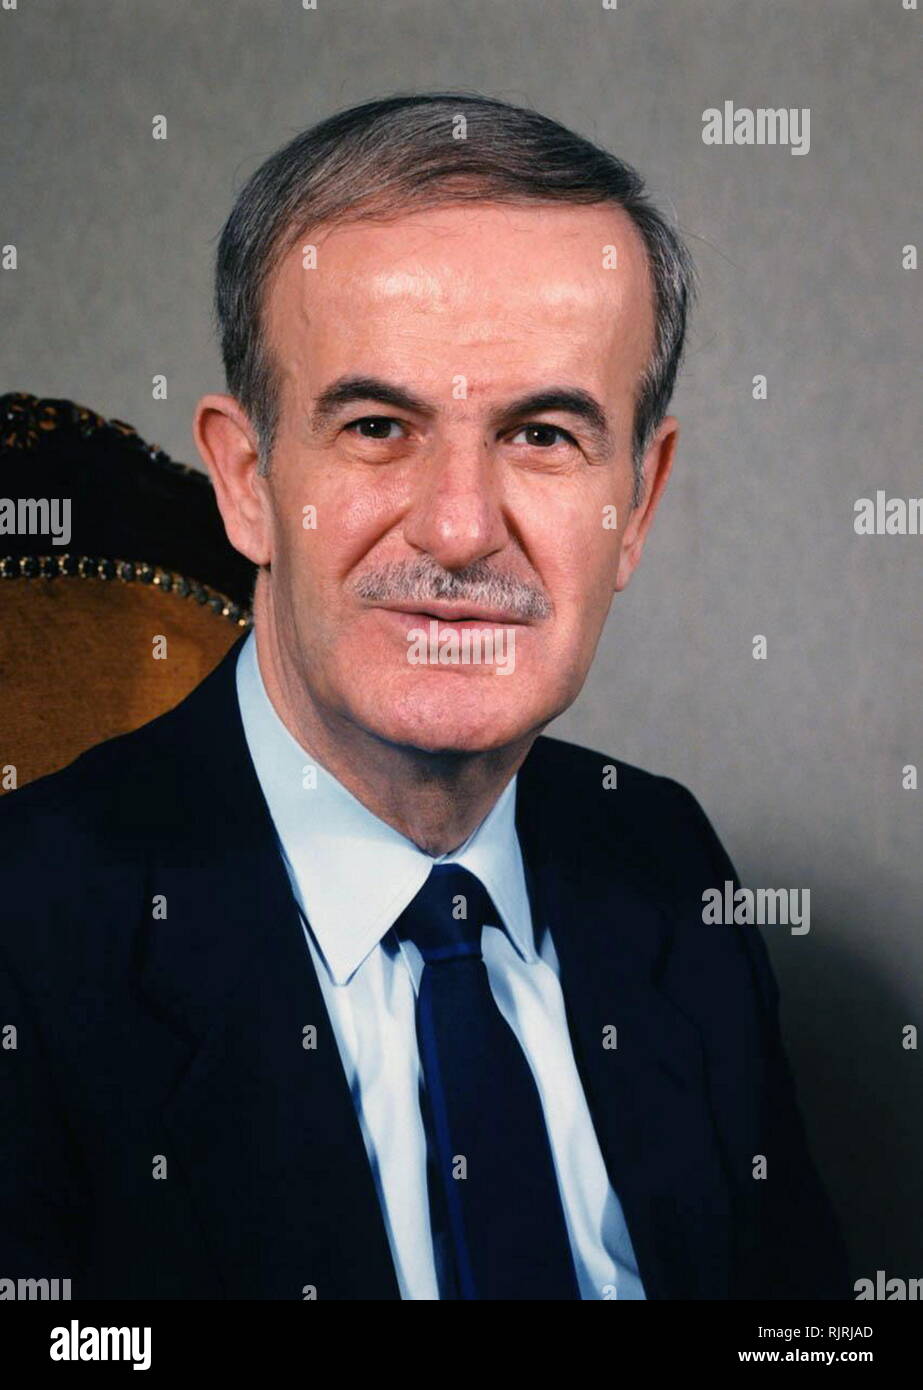 Hafez al-Assad (1930 - 2000), Syrian politician who served as President of Syria from 1971 to 2000. Stock Photo